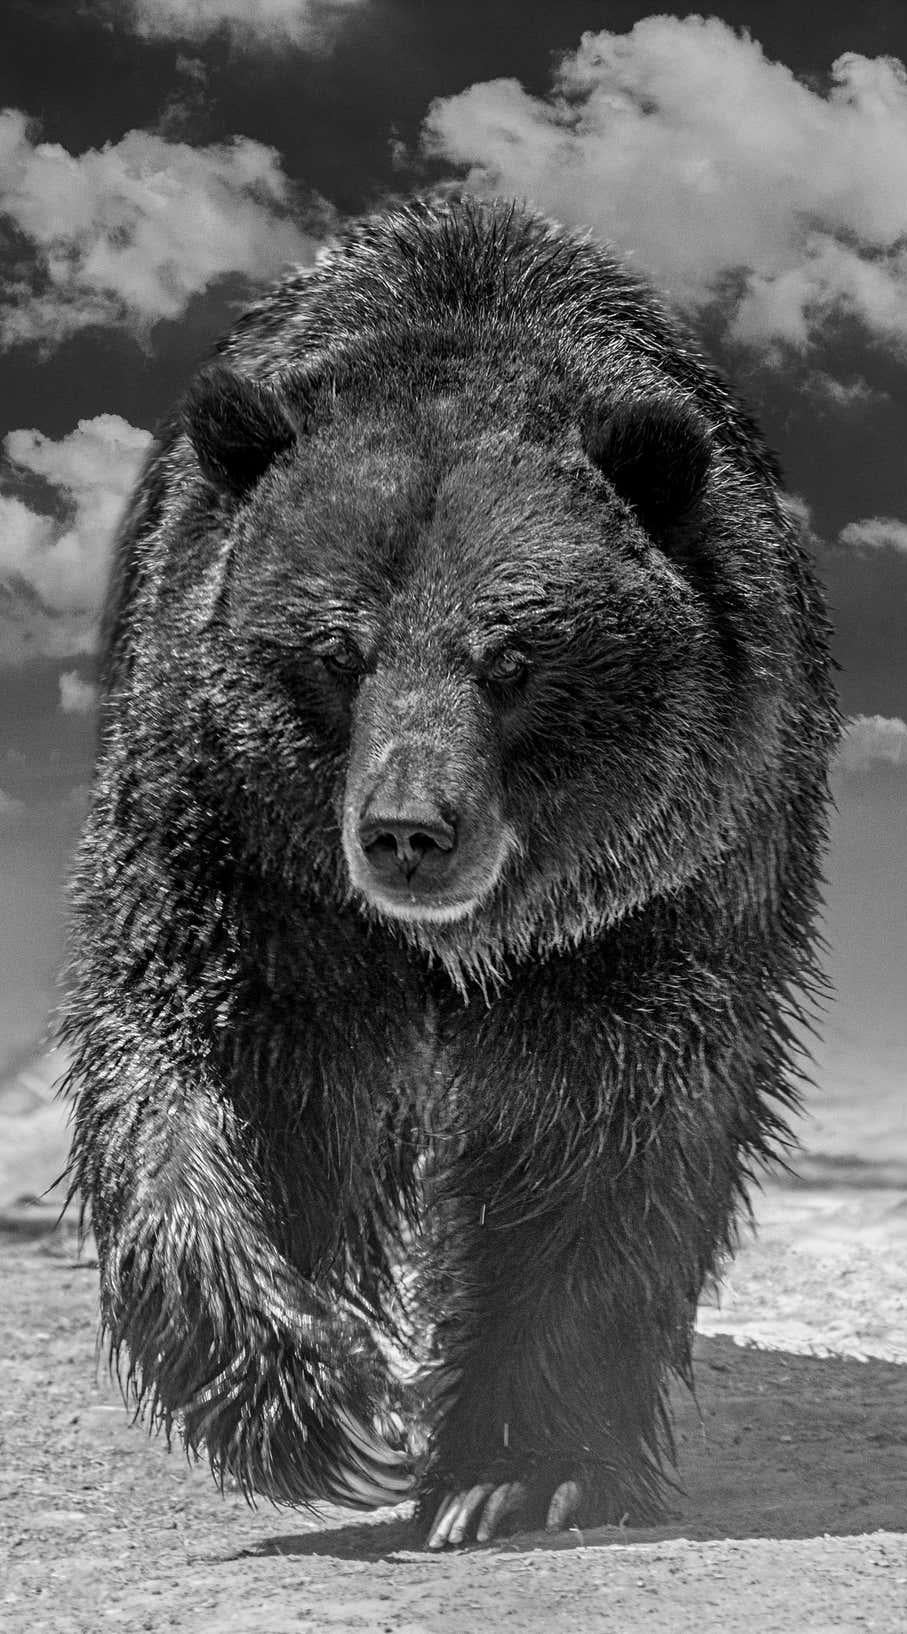 Shane Russeck Black and White Photograph - Grizzly Shores 50x90, Black & White Photography Grizzly Bear Photograph Fine Art